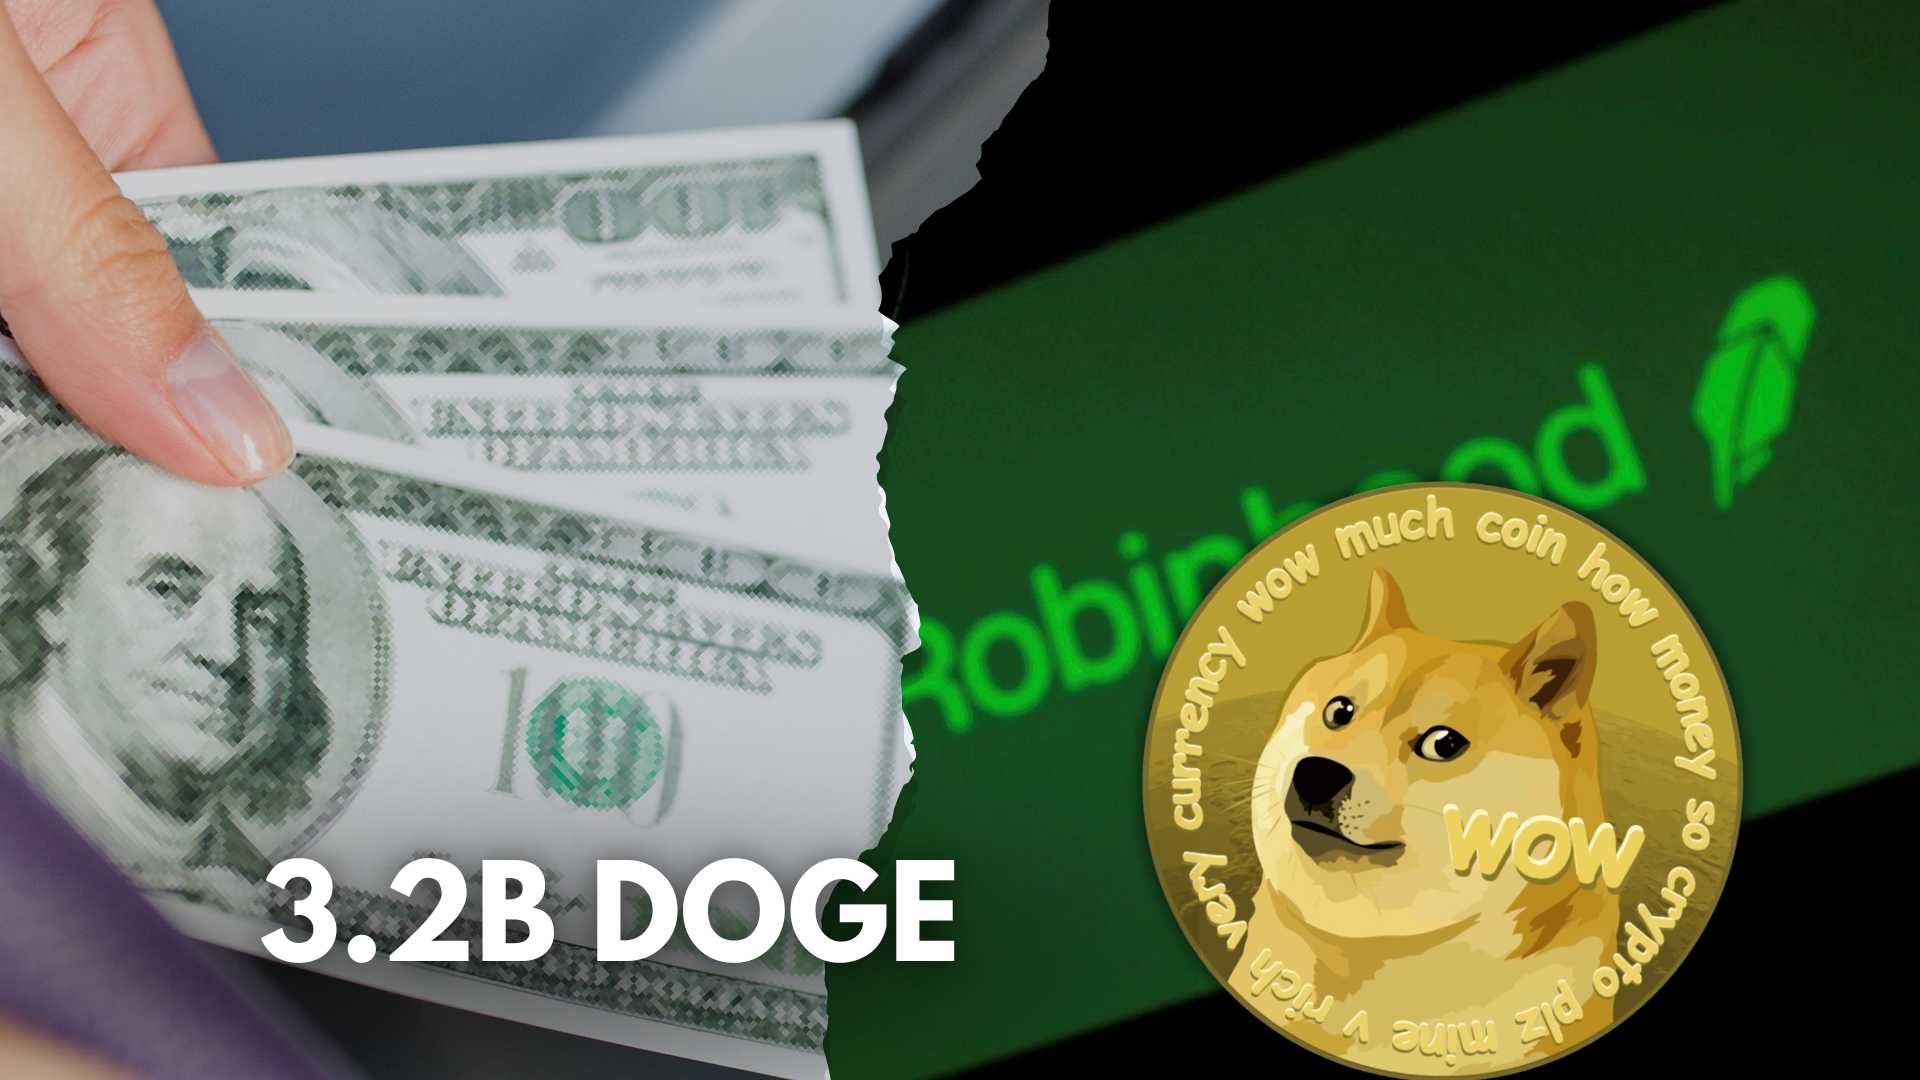 Following the Withdrawal of 3.2B DOGE, Robinhood’s Dogecoin Reserve Decreases